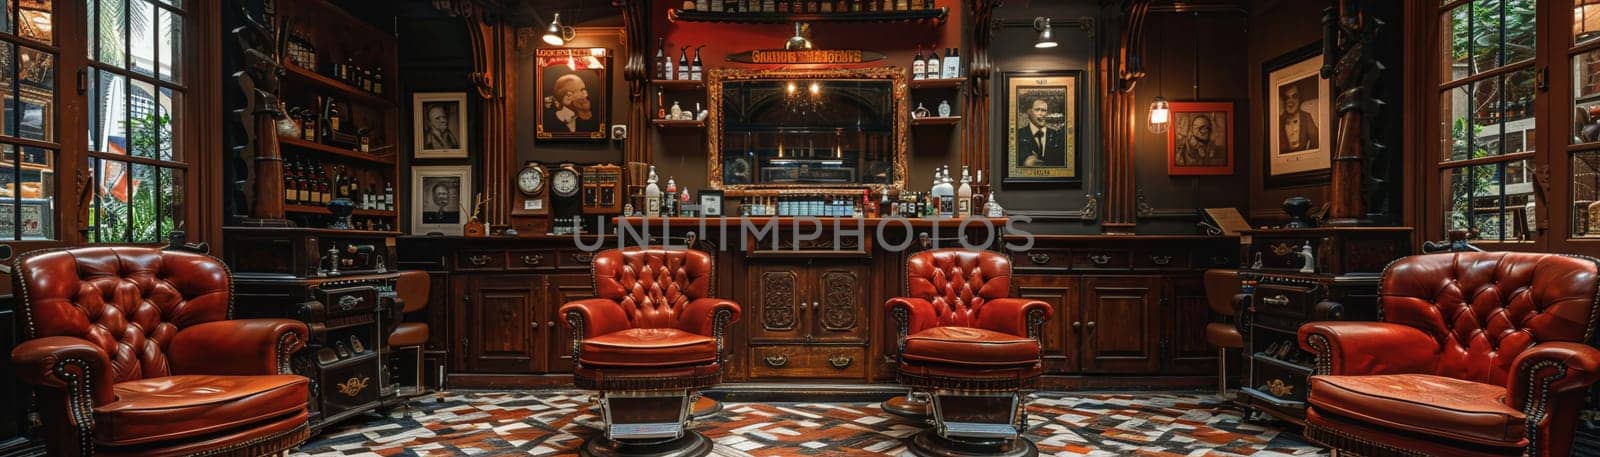 Vintage barbershop interior with classic chairs and nostalgic decor.